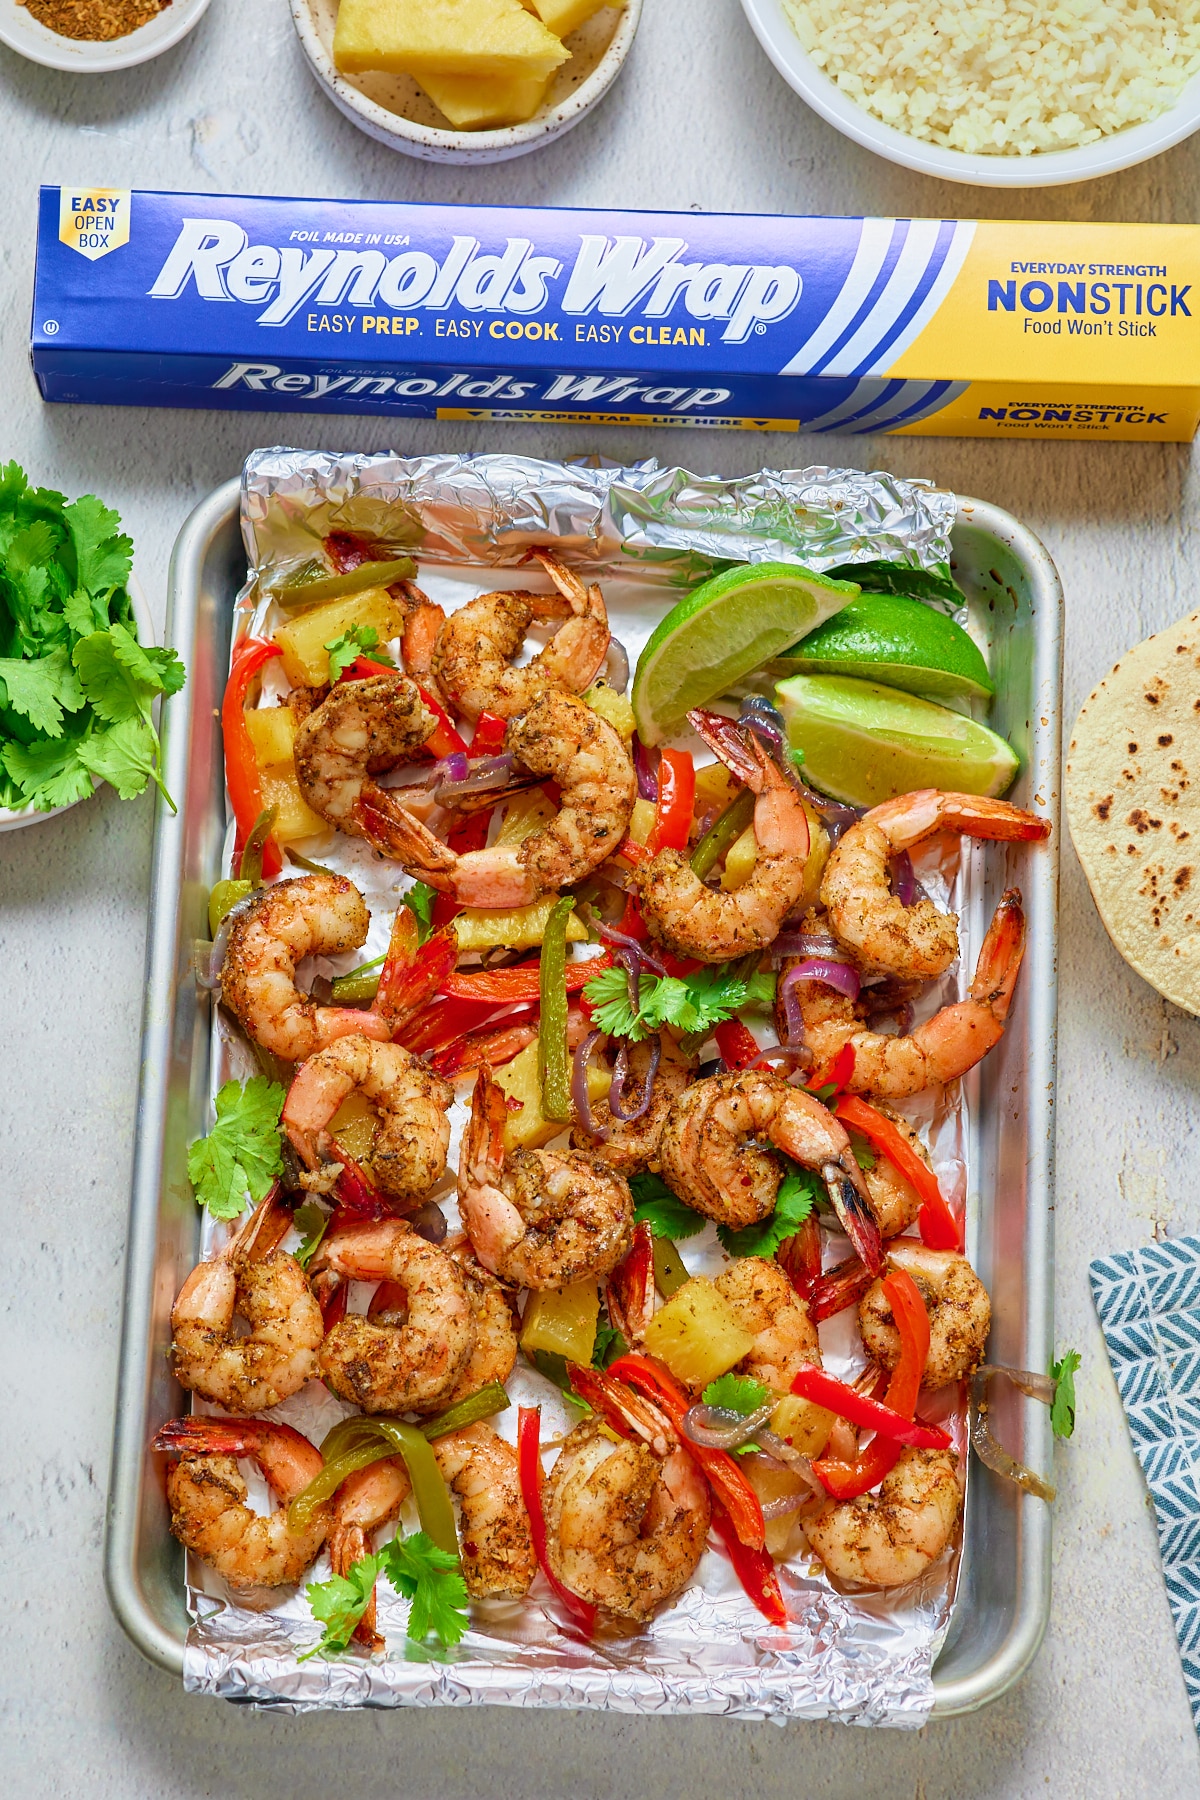 jamaican jerk shrimp in sheetpan lined with foil and reynolds wrap